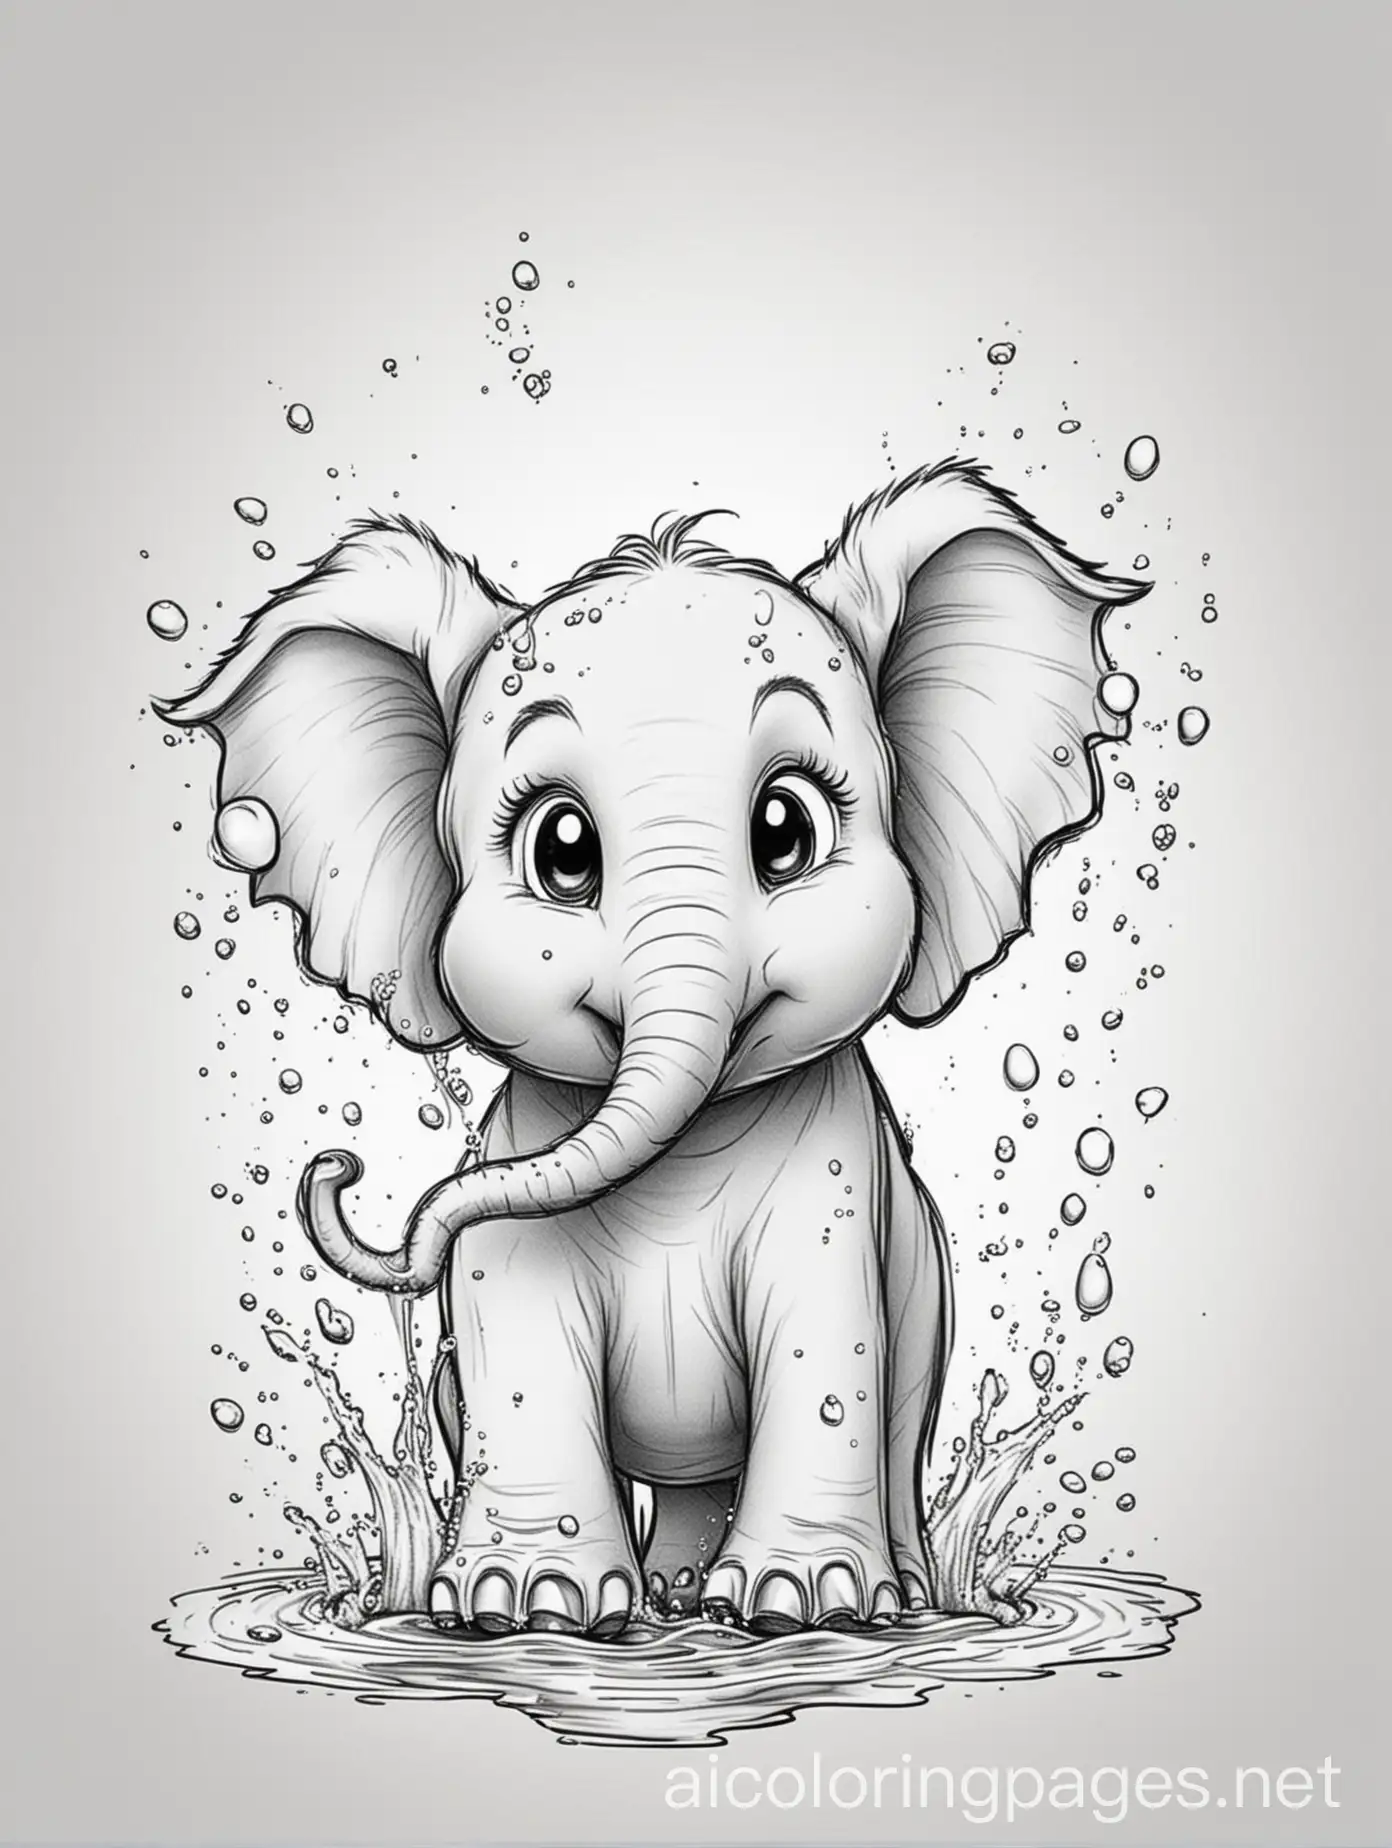 cute elephant splashing water, Coloring Page, black and white, line art, pure white background, Simplicity, Ample White Space. , Coloring Page, black and white, line art, white background, Simplicity, Ample White Space. The background of the coloring page is plain white to make it easy for young children to color within the lines. The outlines of all the subjects are easy to distinguish, making it simple for kids to color without too much difficulty